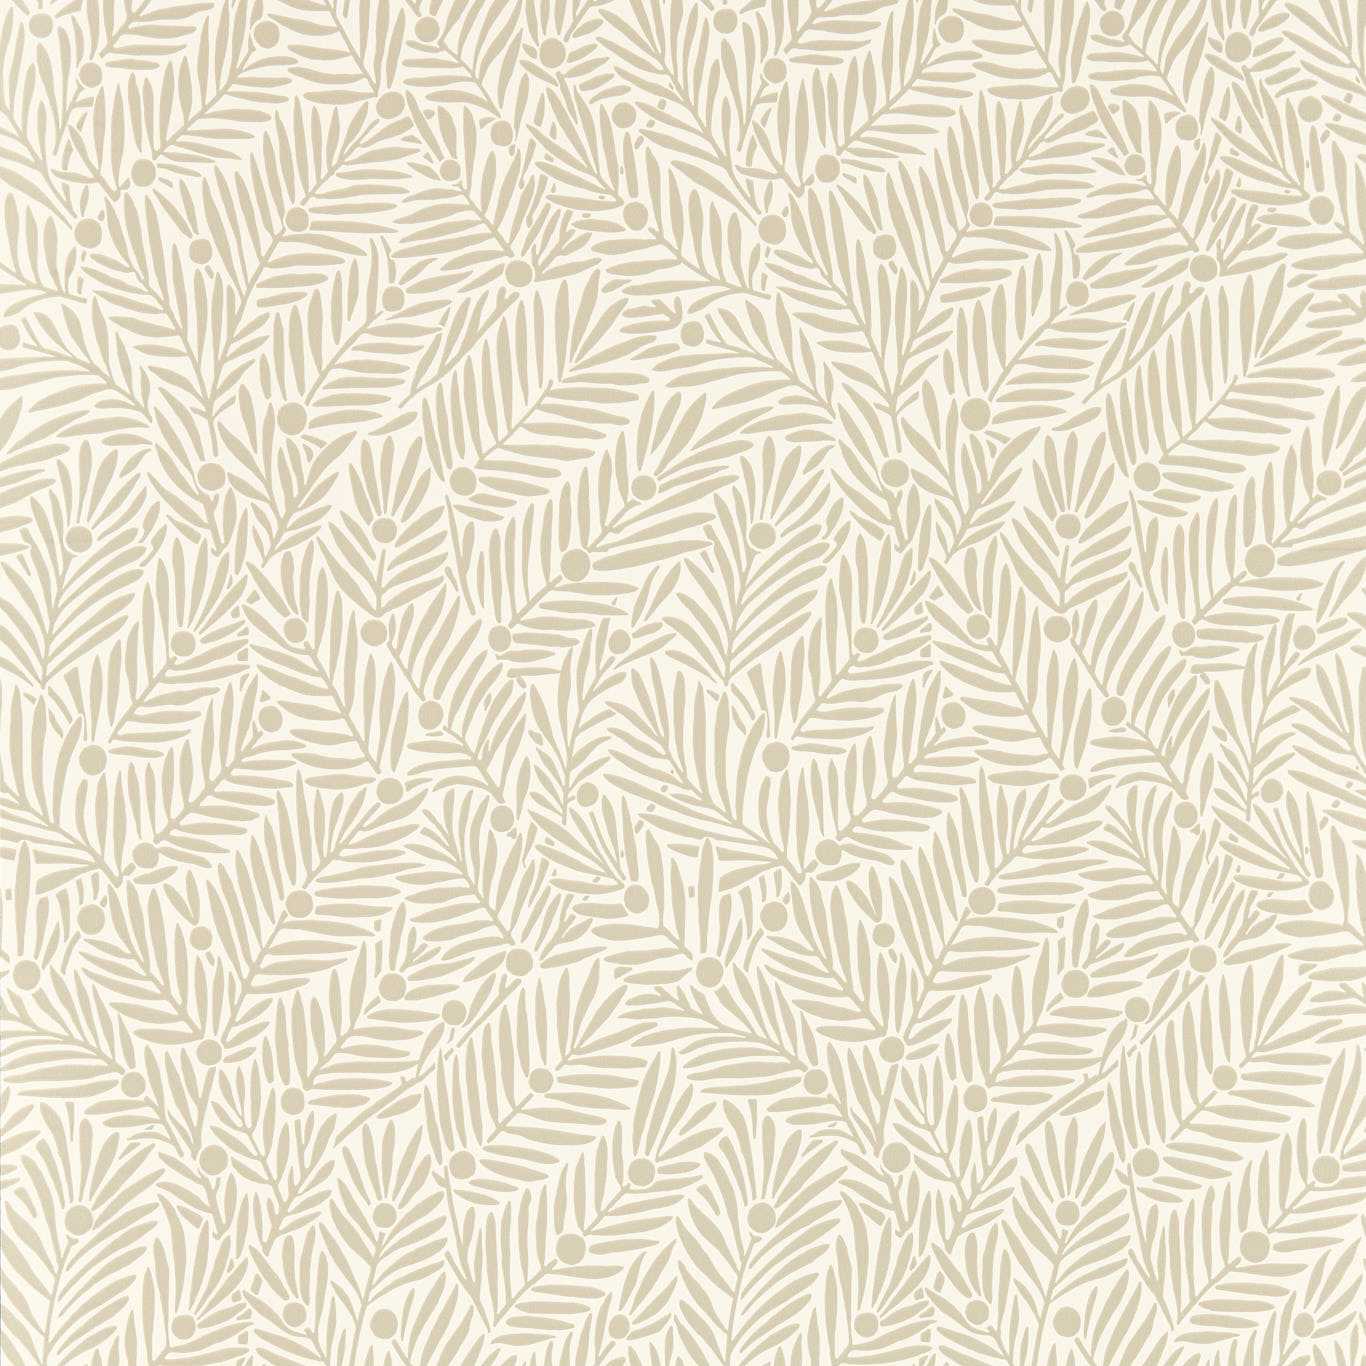 Yew & Aril Rice Paper Wallpaper MVOW217347 by Morris & Co